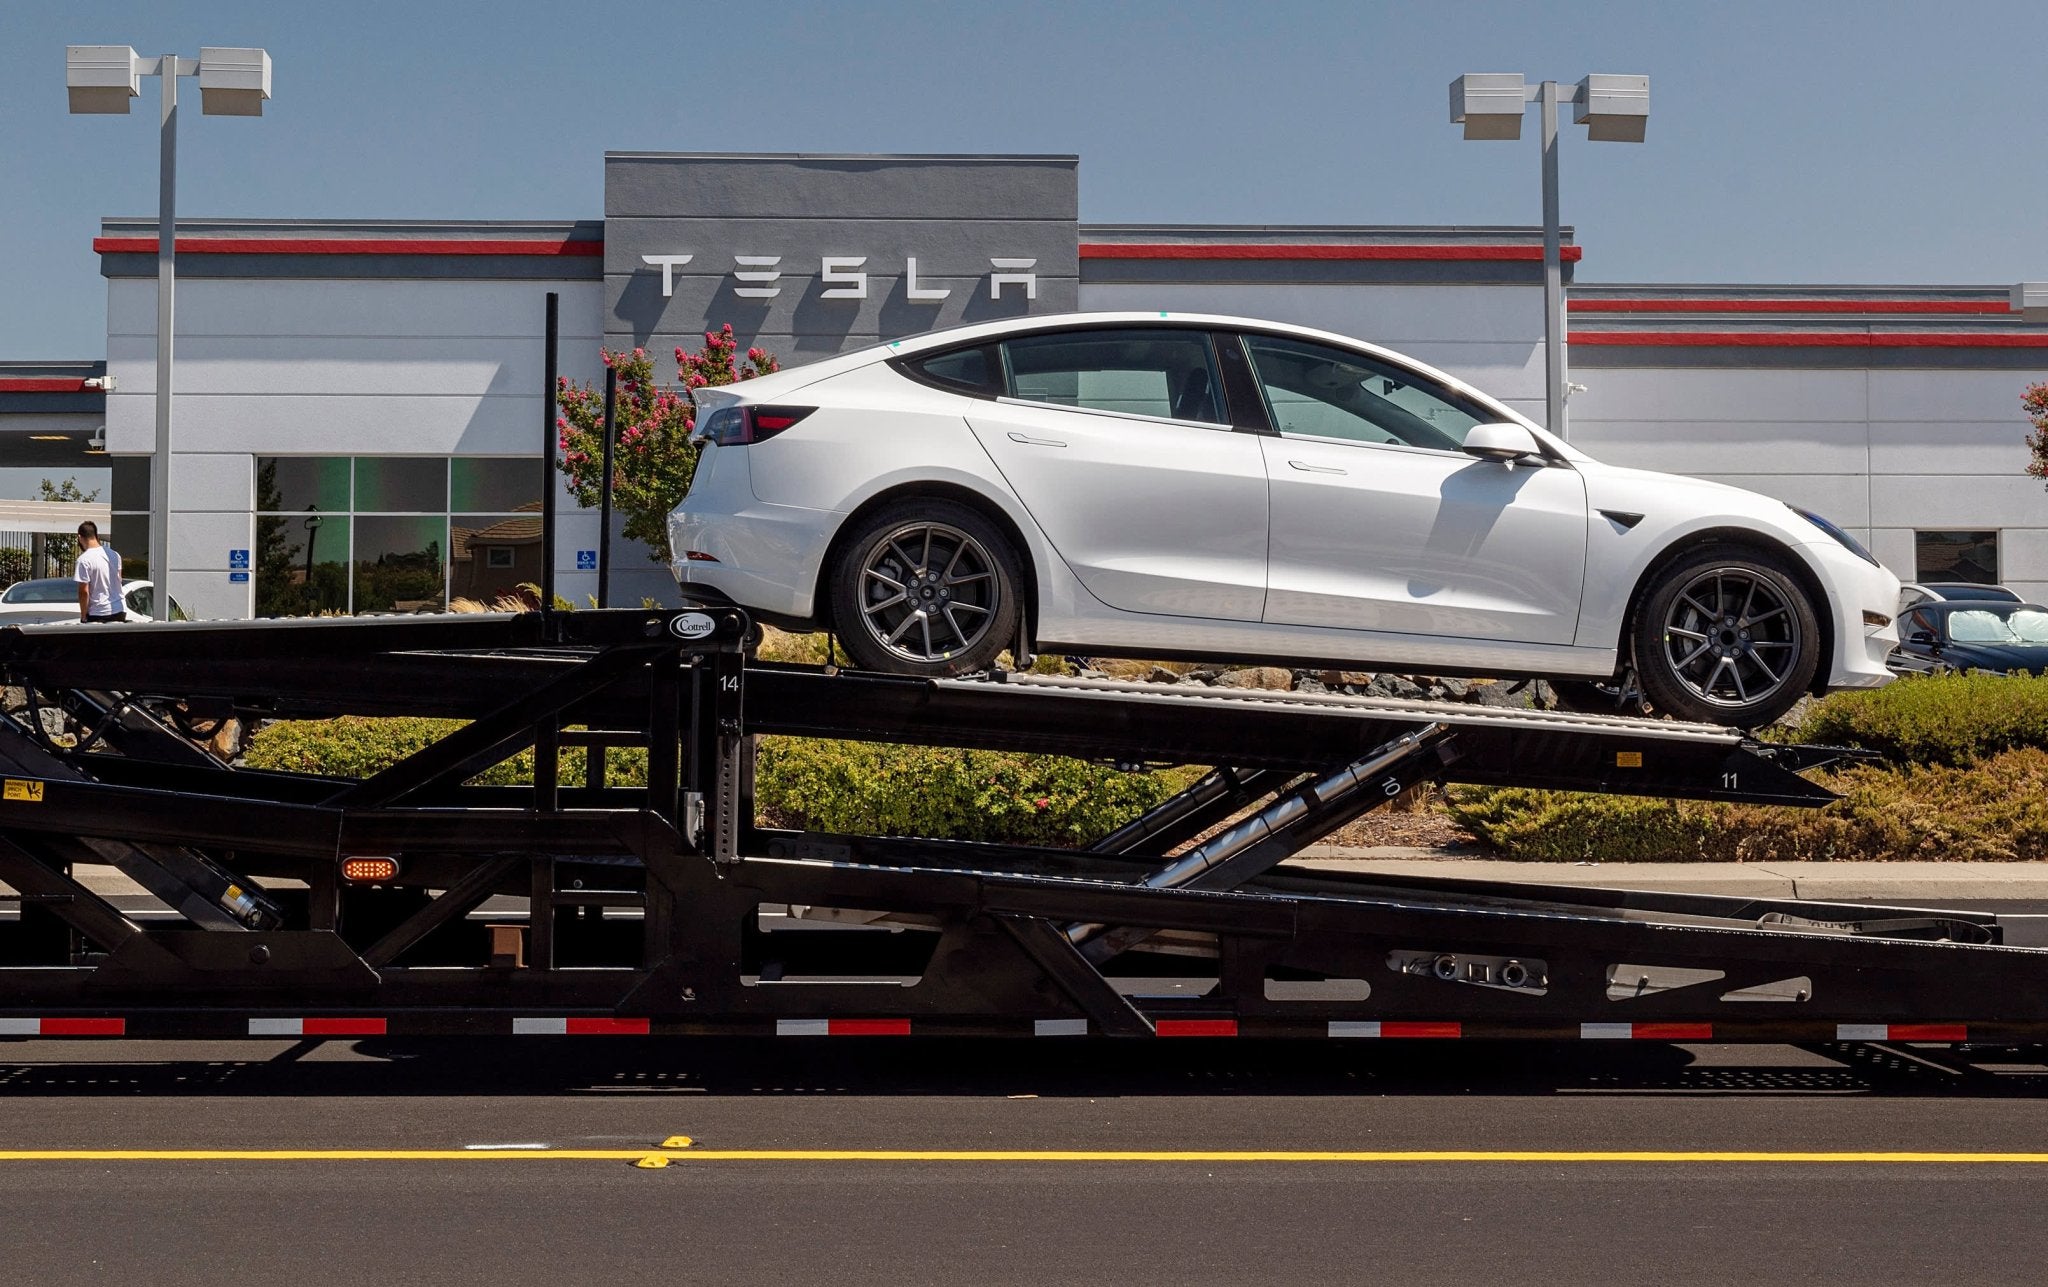 What do you think is Tesla's pain point? - acetesla